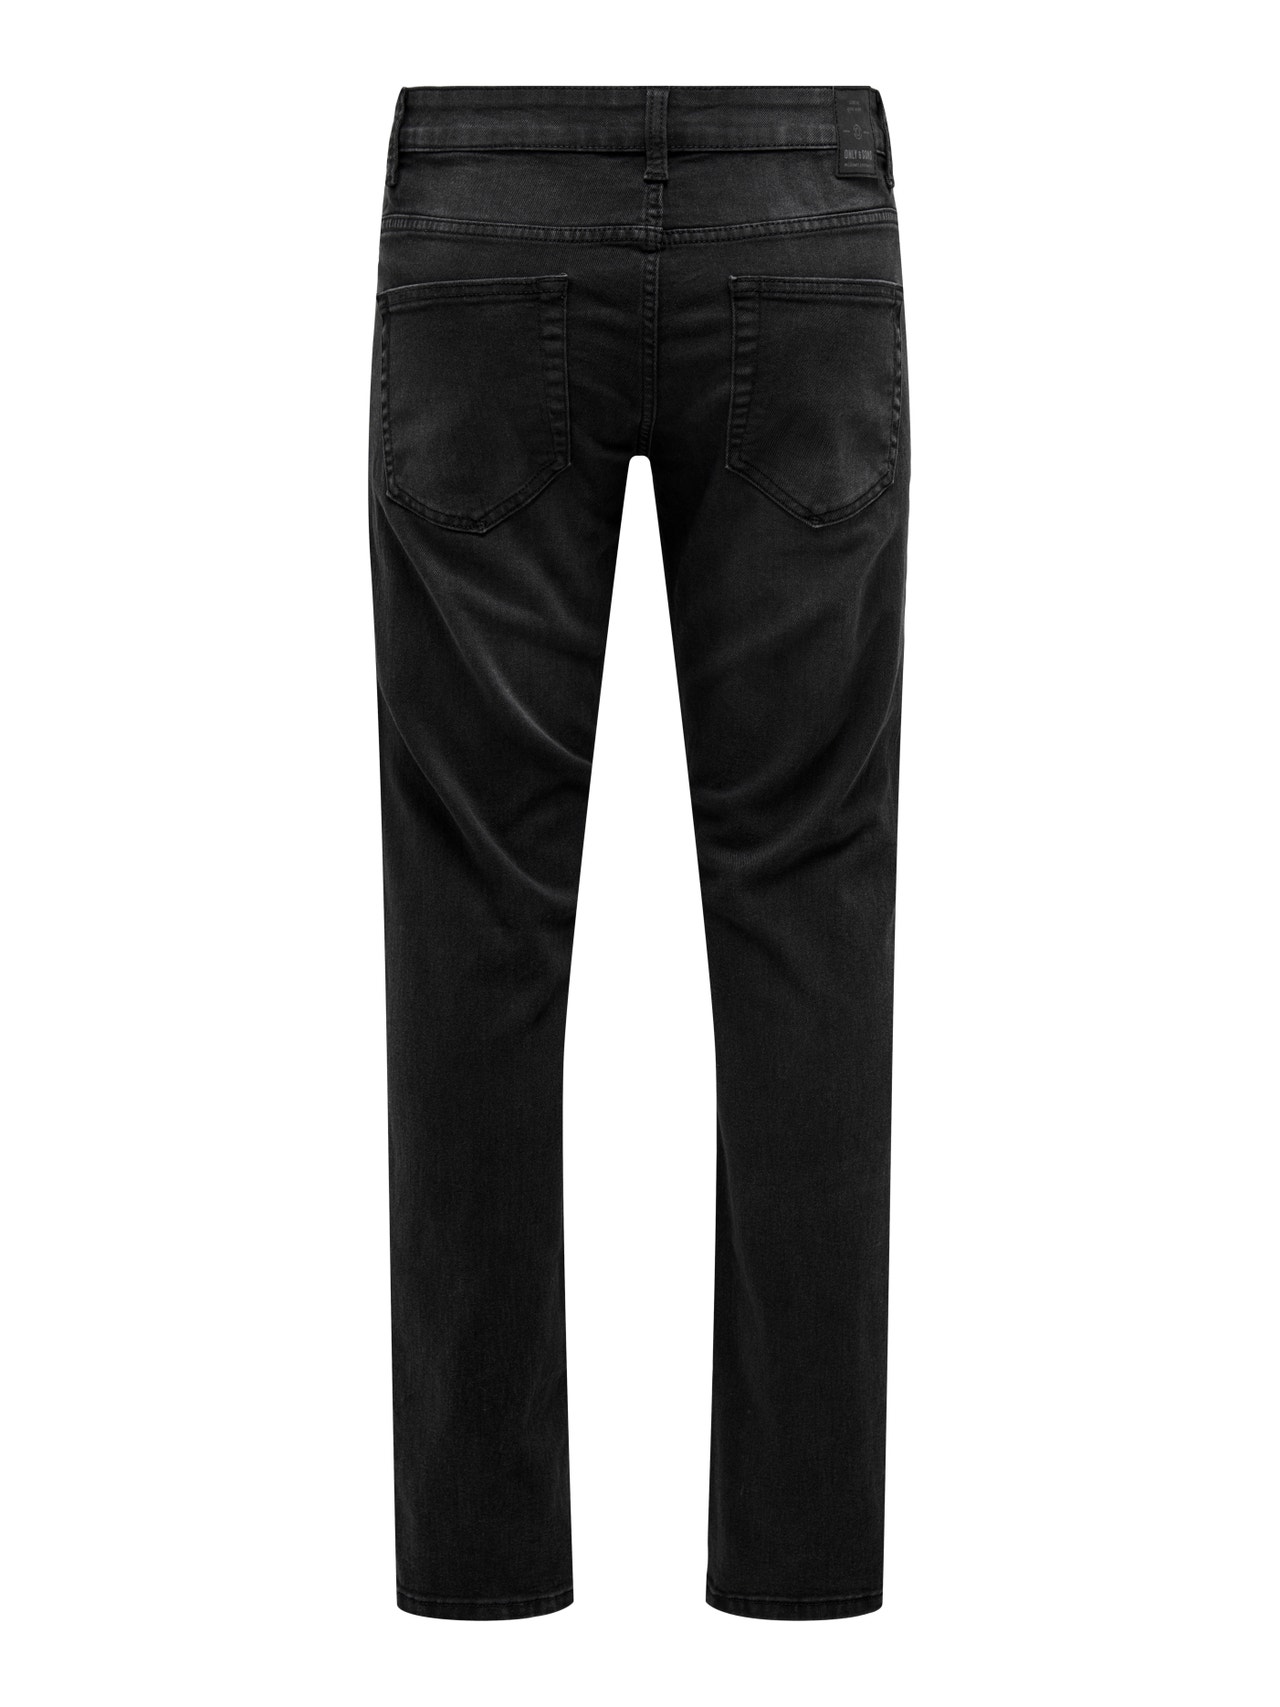 ONLY & SONS Jeans Slim Fit Taille classique -Washed Black - 22026619